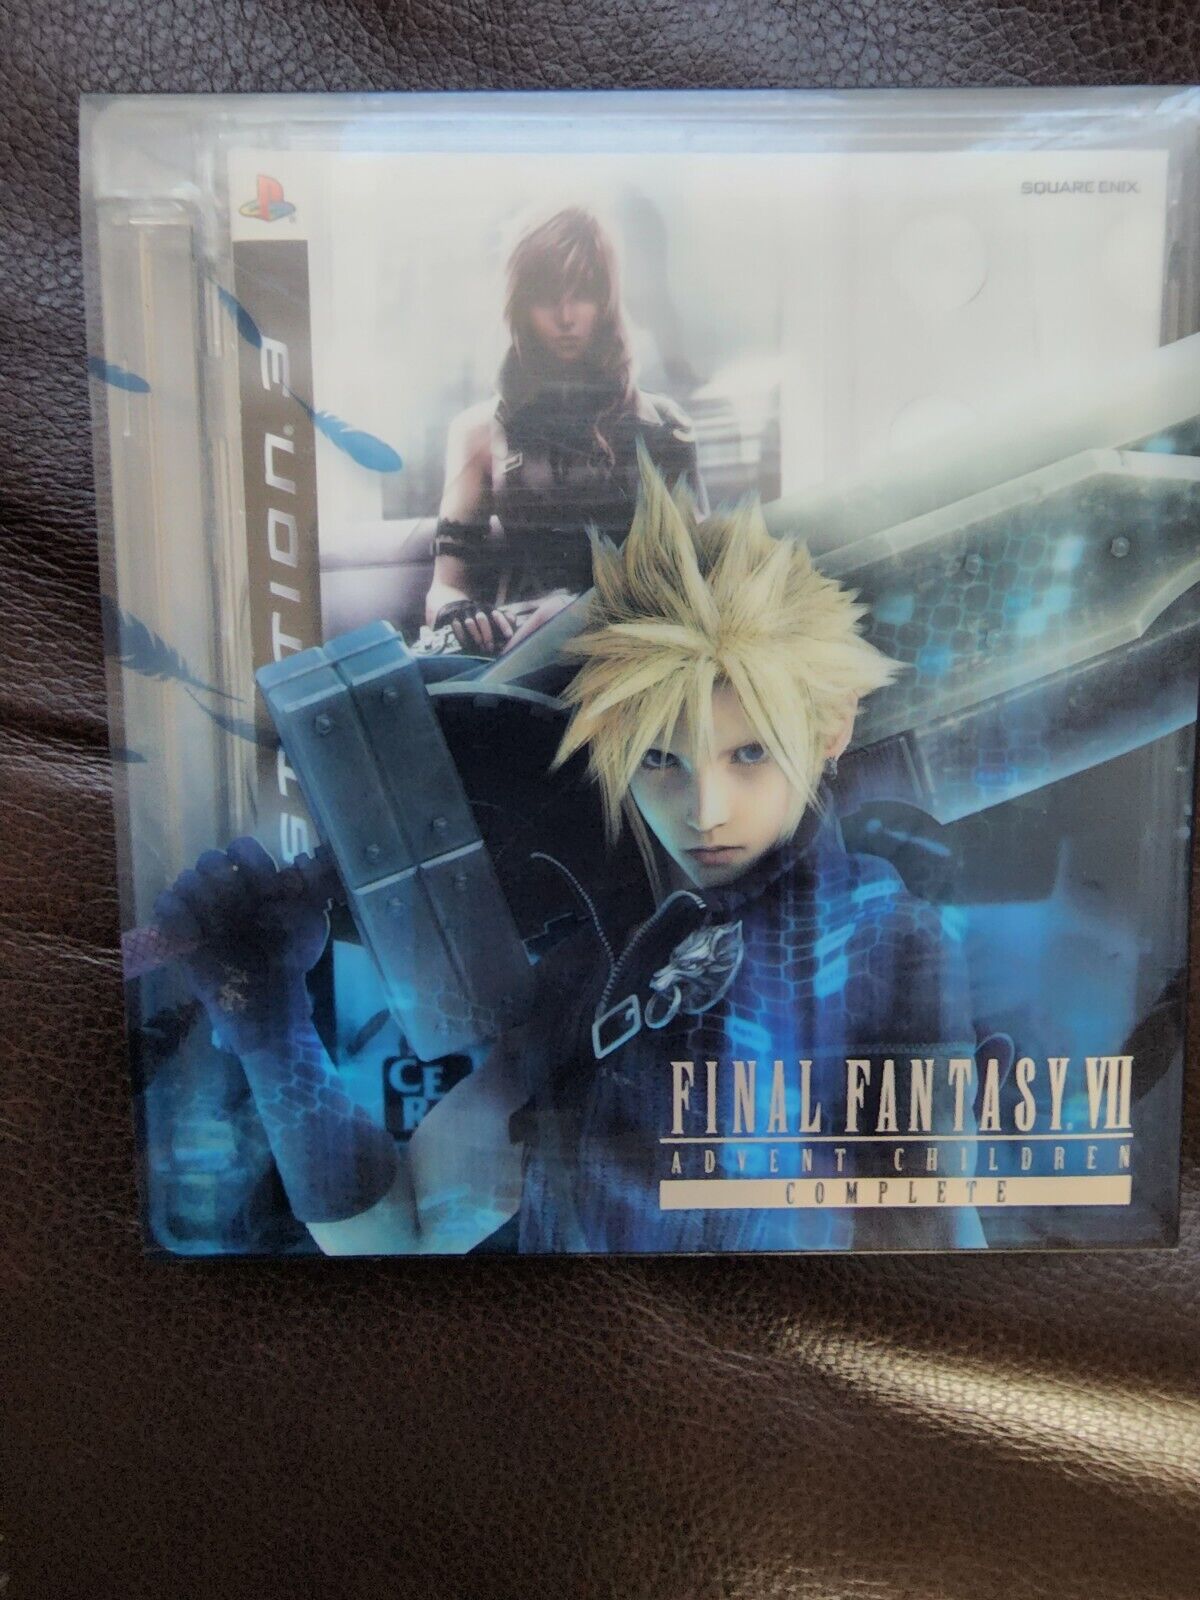 Kwelling overschrijving Christus Final Fantasy VII Advent Children Complete Blu-ray FFXlll PS3 game Trial  Version 4988601461399 | eBay